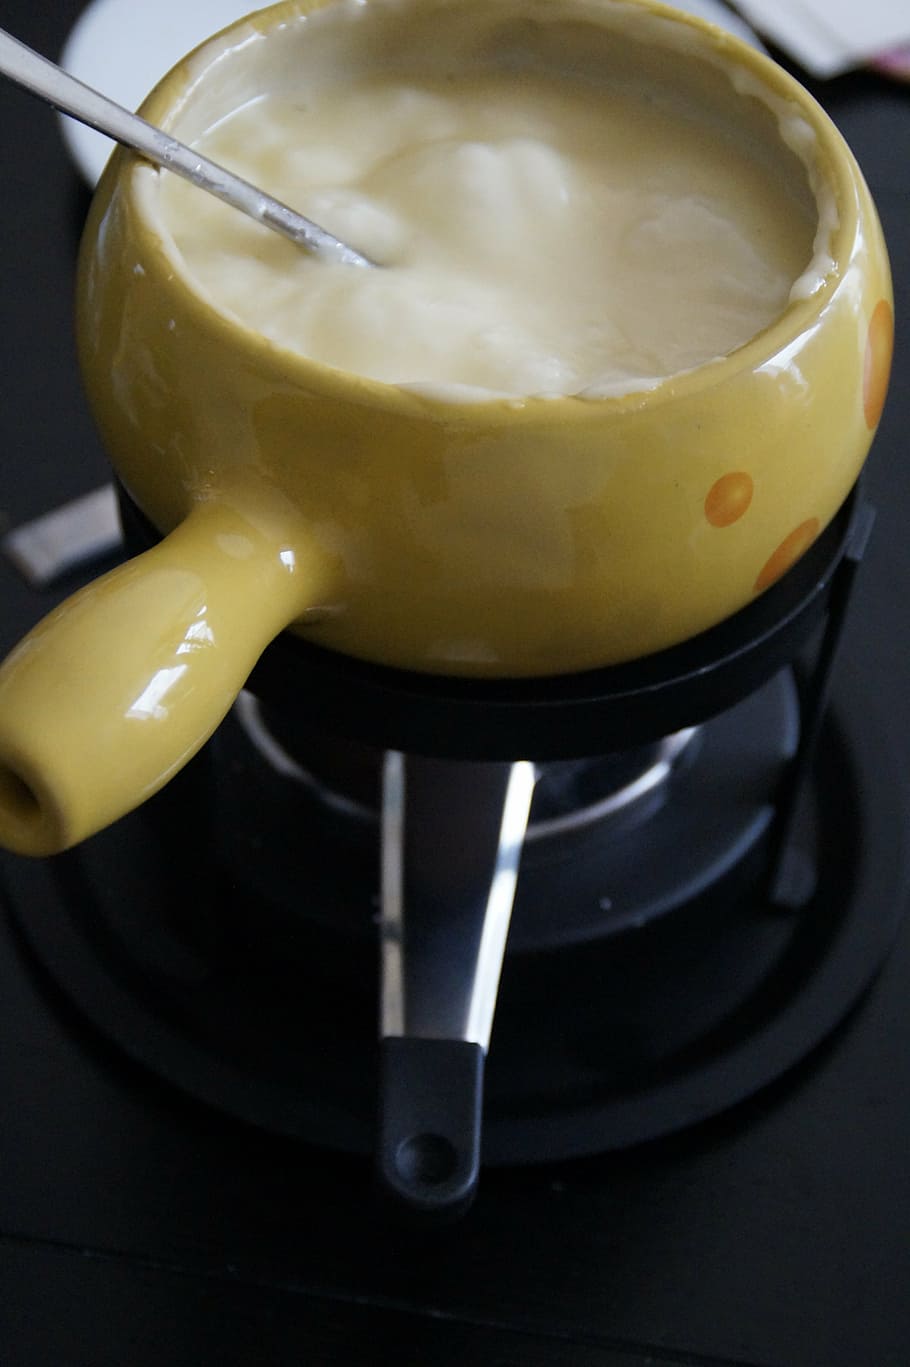 fondue, switzerland, cheese fondue, specialty, food, delicious, national dish, court, eat, meal